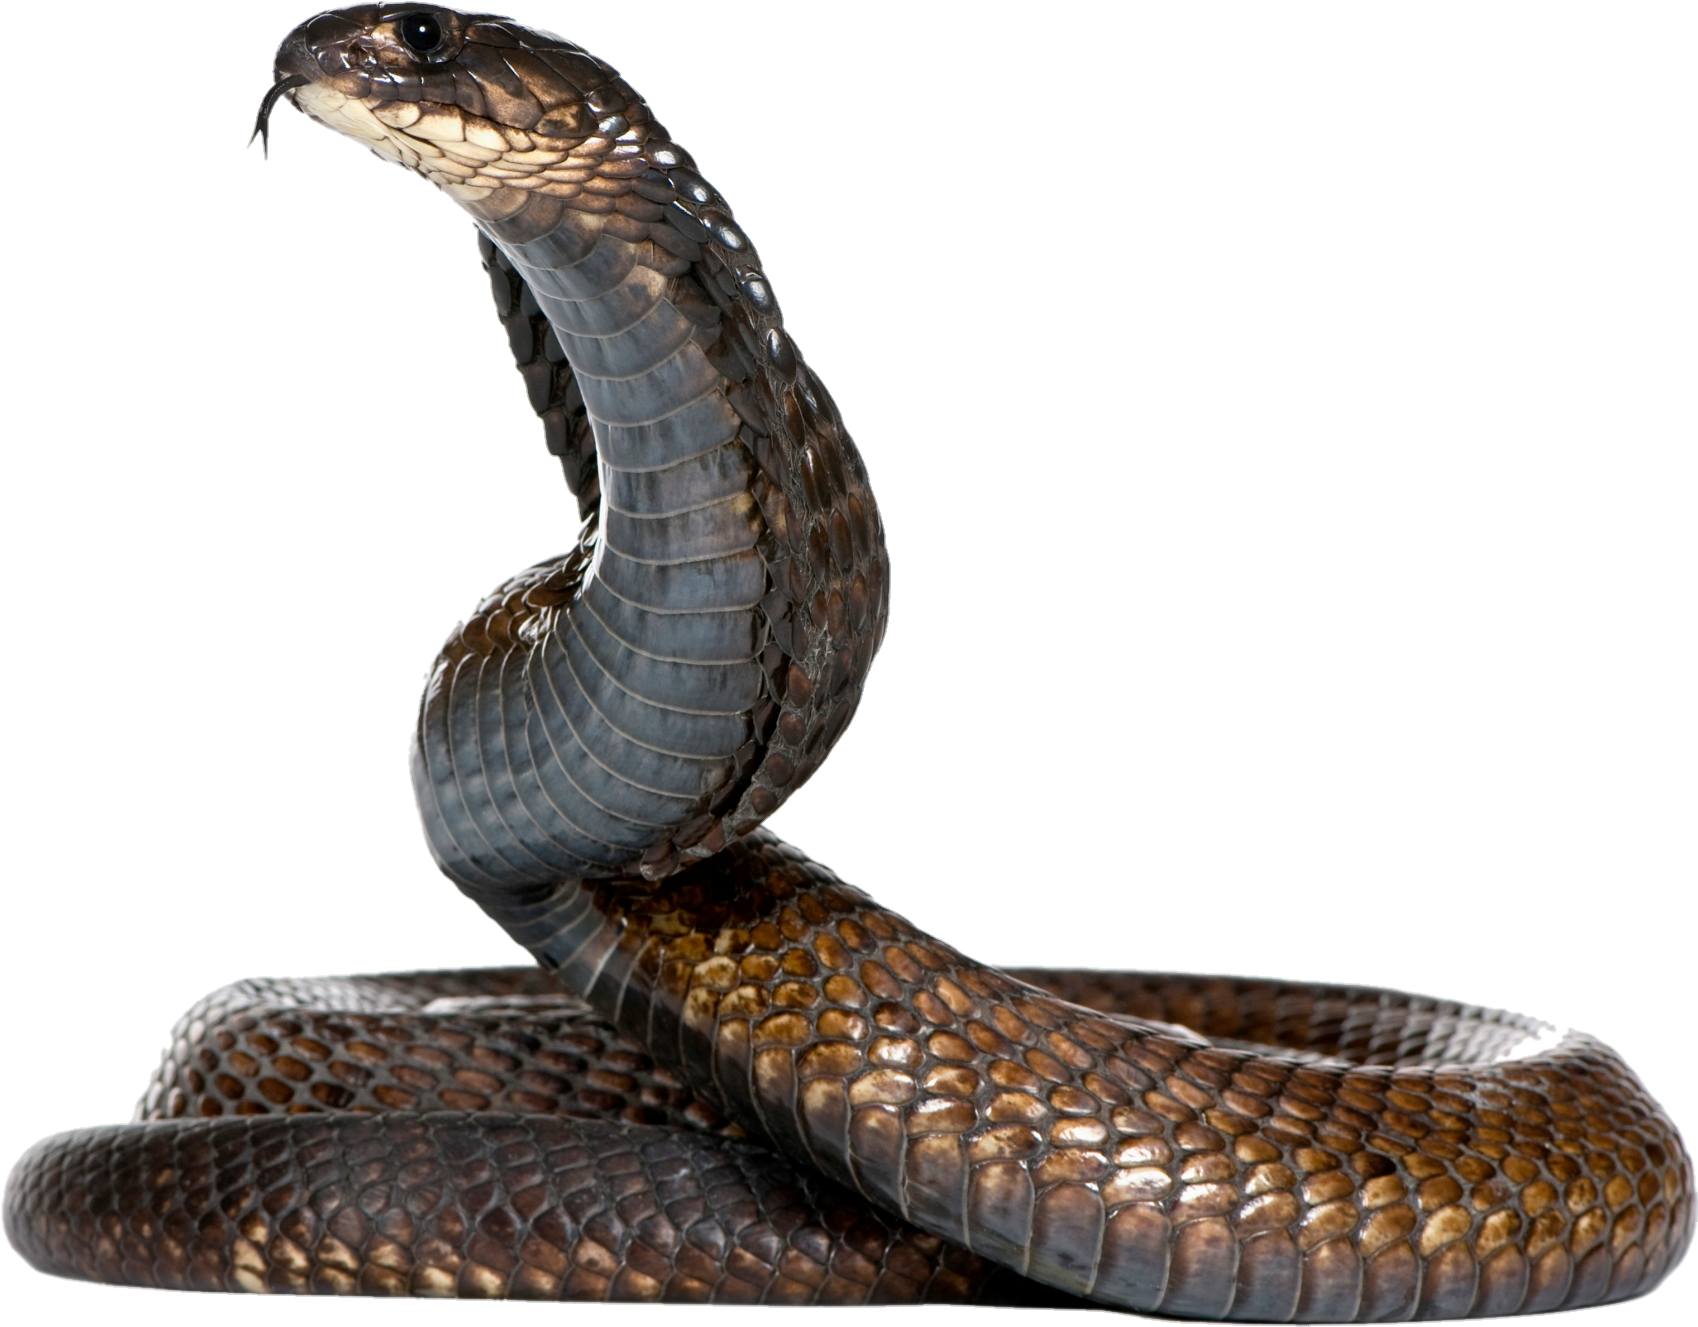 snake-png-image-pngfre-11